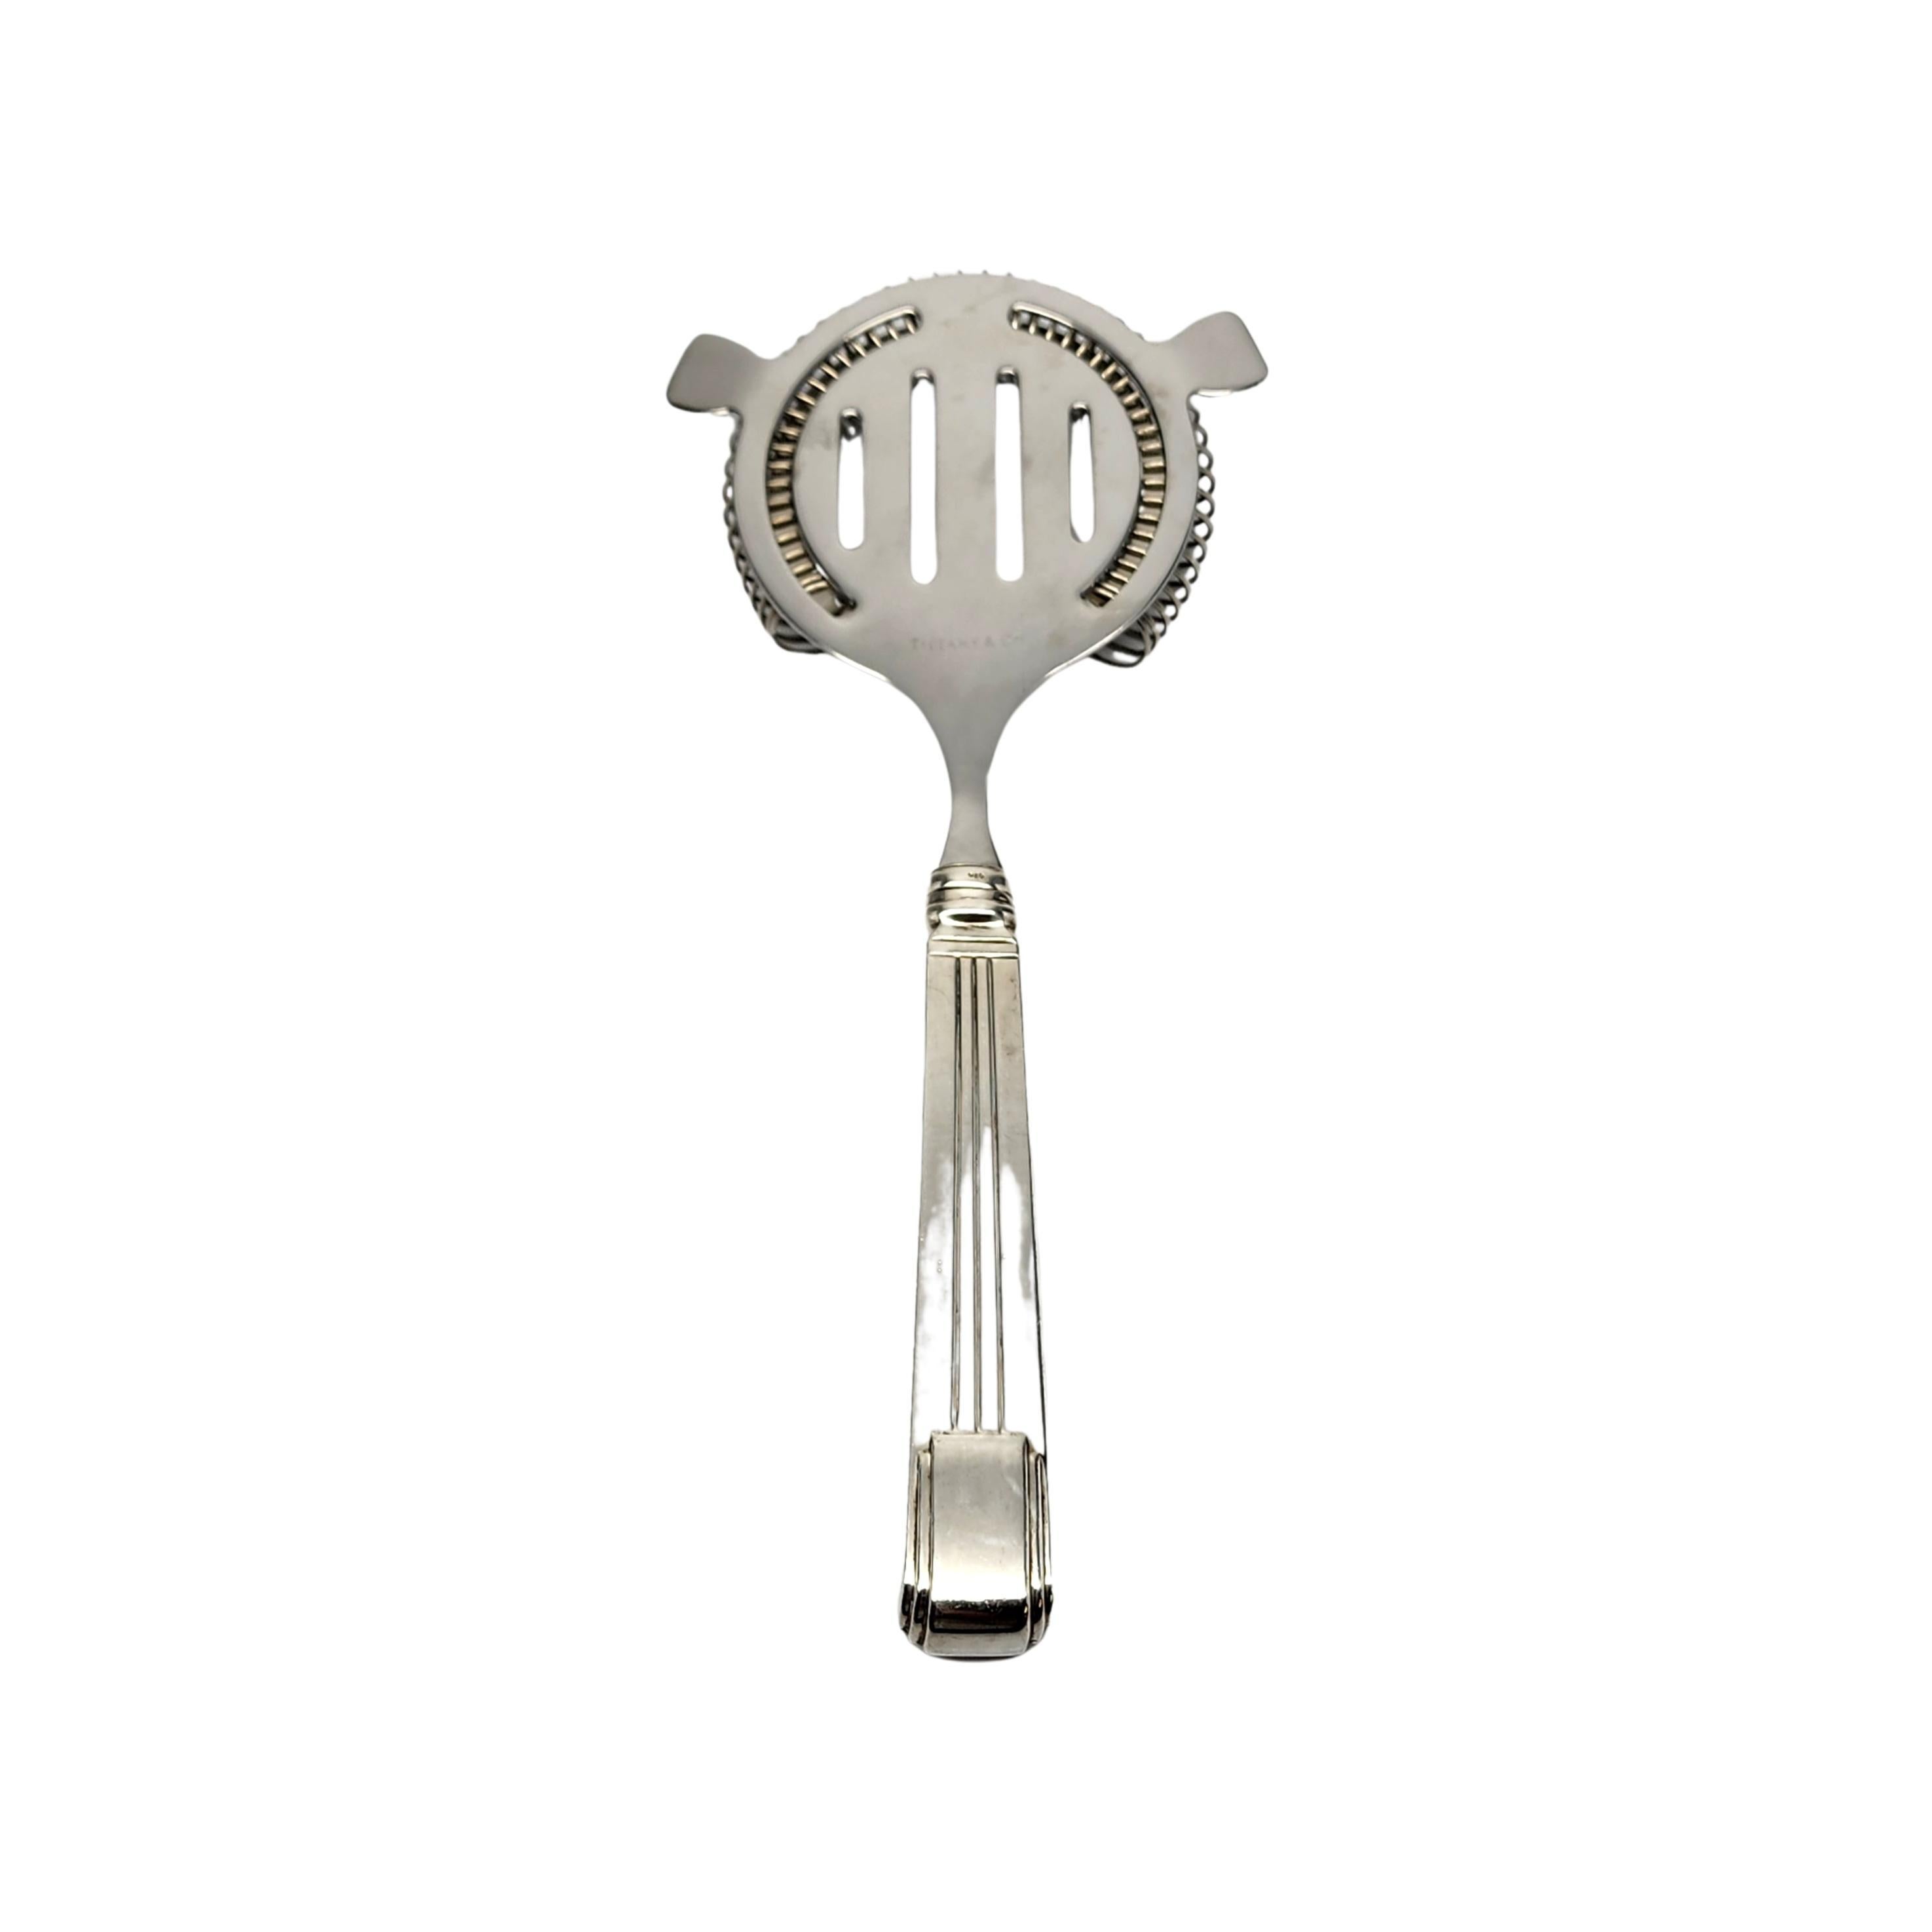 Sterling silver handle cocktail strainer by Tiffany & Co's Century pattern.

No monogram

The Century pattern was designed by Arthur LeRoy Barney in 1937 as part of Tiffany's 100th anniversary celebration. Tiffany's first modern design pattern, it